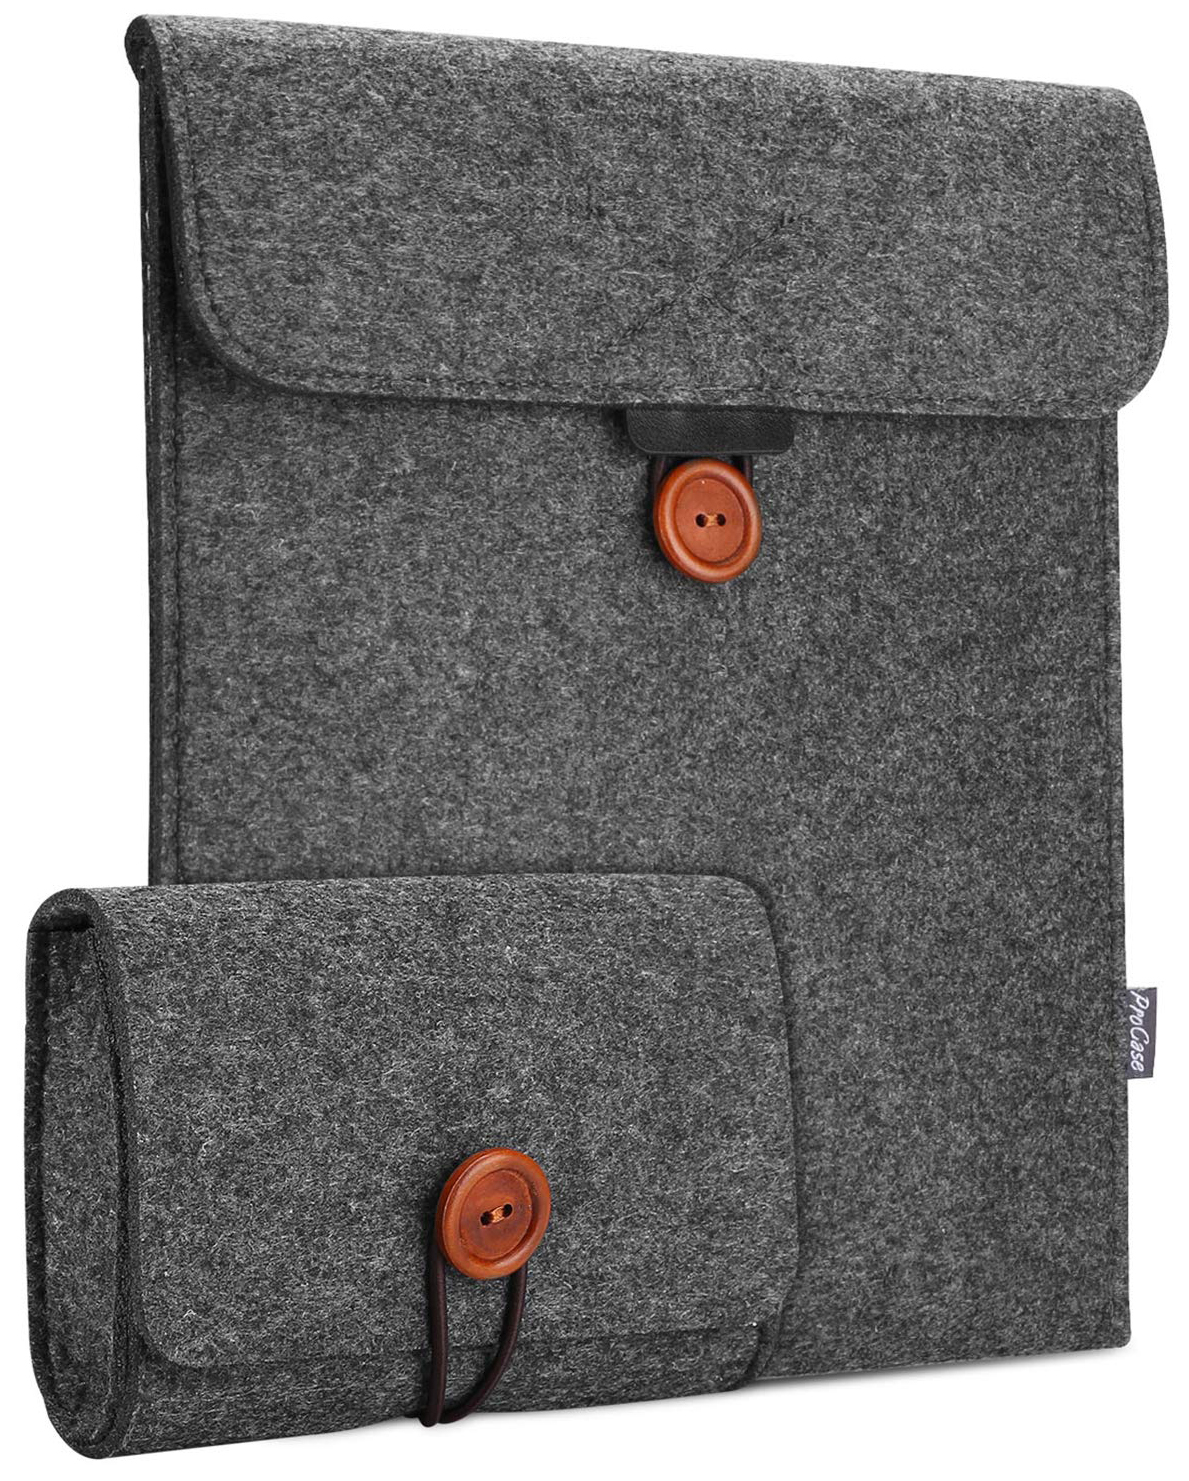 Procase Sleeve Bag Case For 7th Gen Ipad